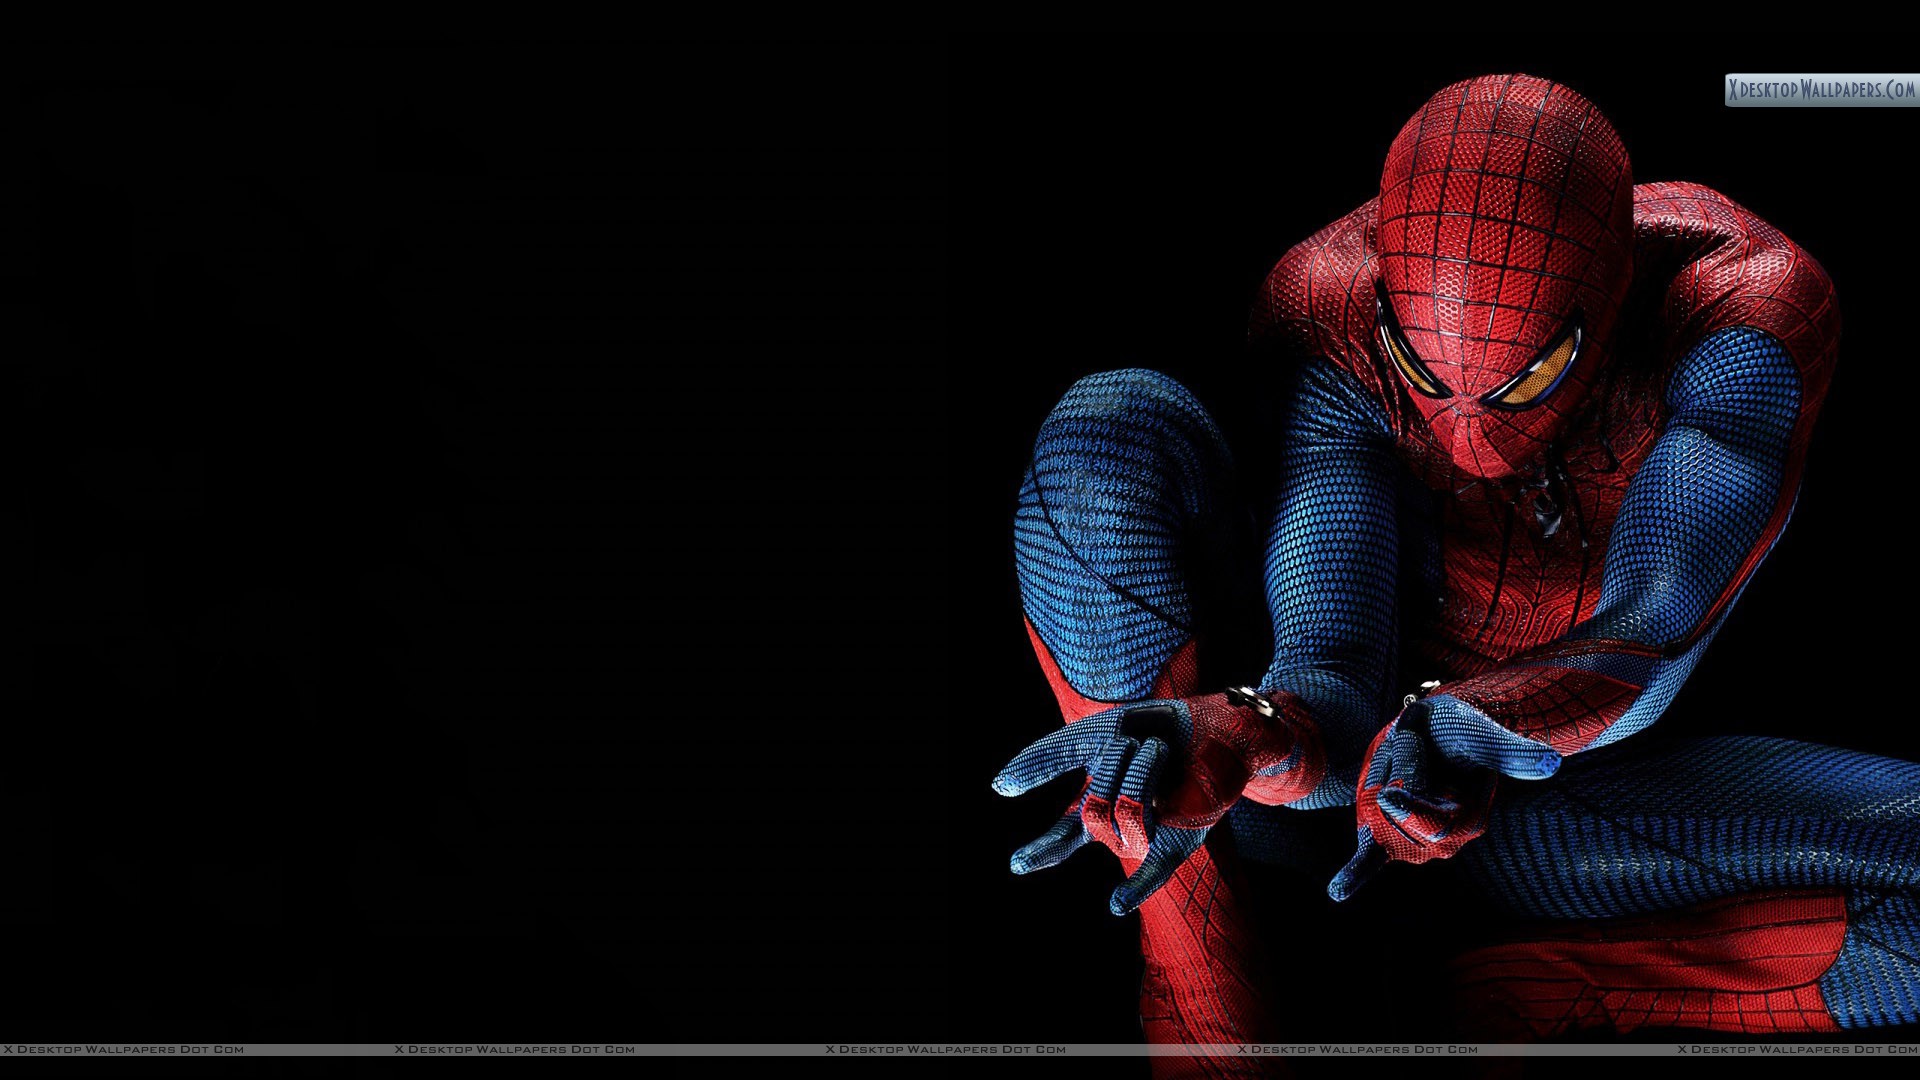 HD Wallpapers Of Spiderman 4 Group (81+)